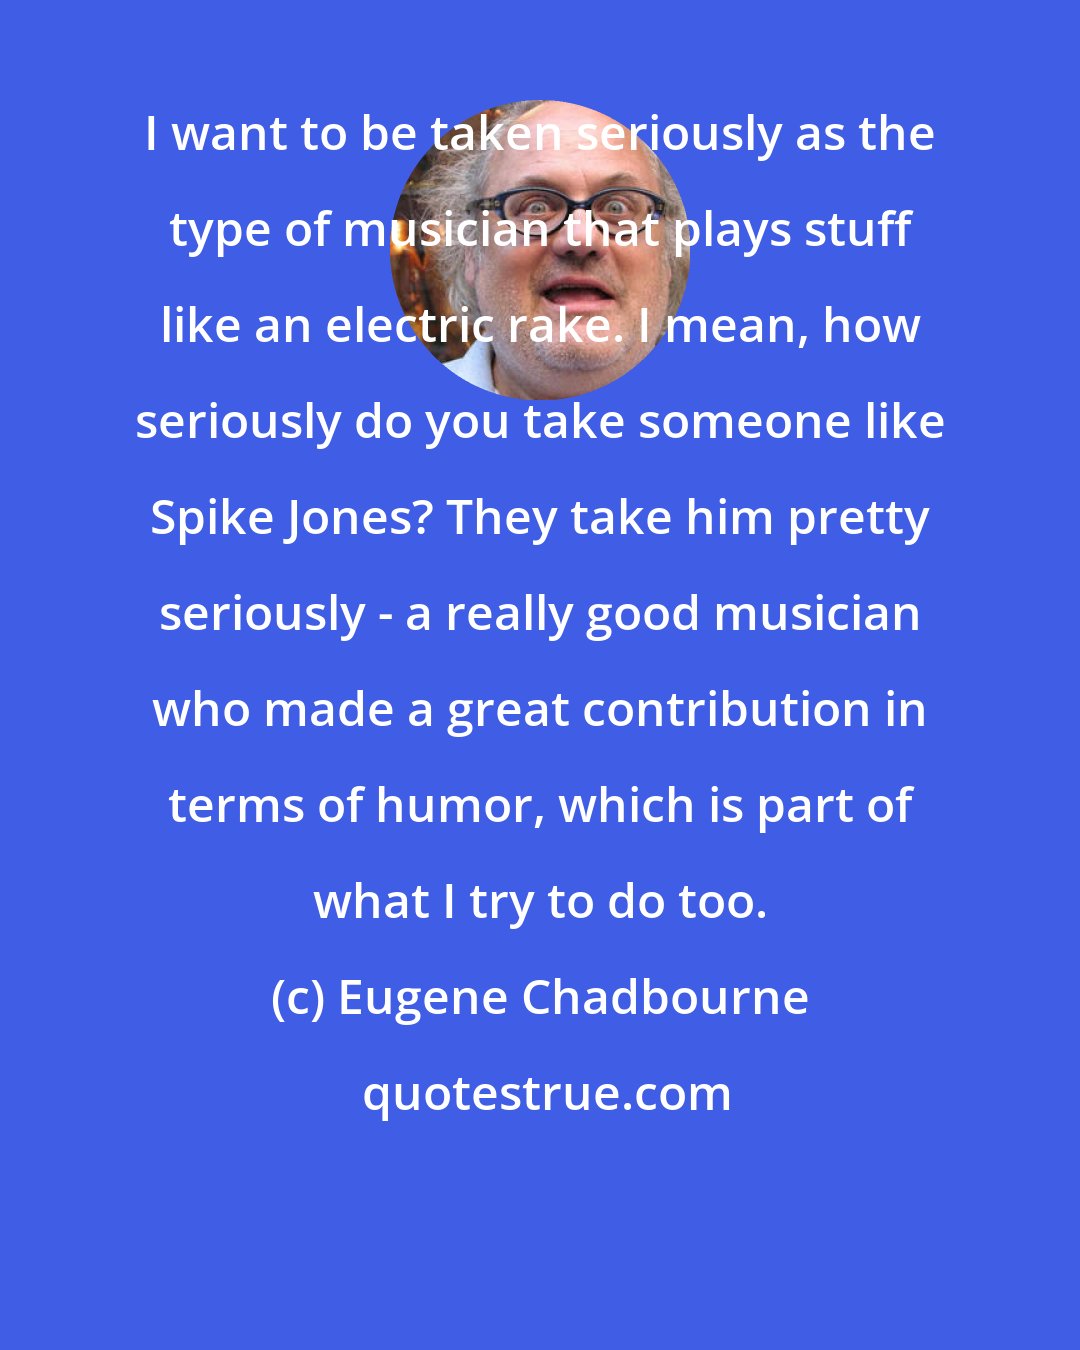 Eugene Chadbourne: I want to be taken seriously as the type of musician that plays stuff like an electric rake. I mean, how seriously do you take someone like Spike Jones? They take him pretty seriously - a really good musician who made a great contribution in terms of humor, which is part of what I try to do too.